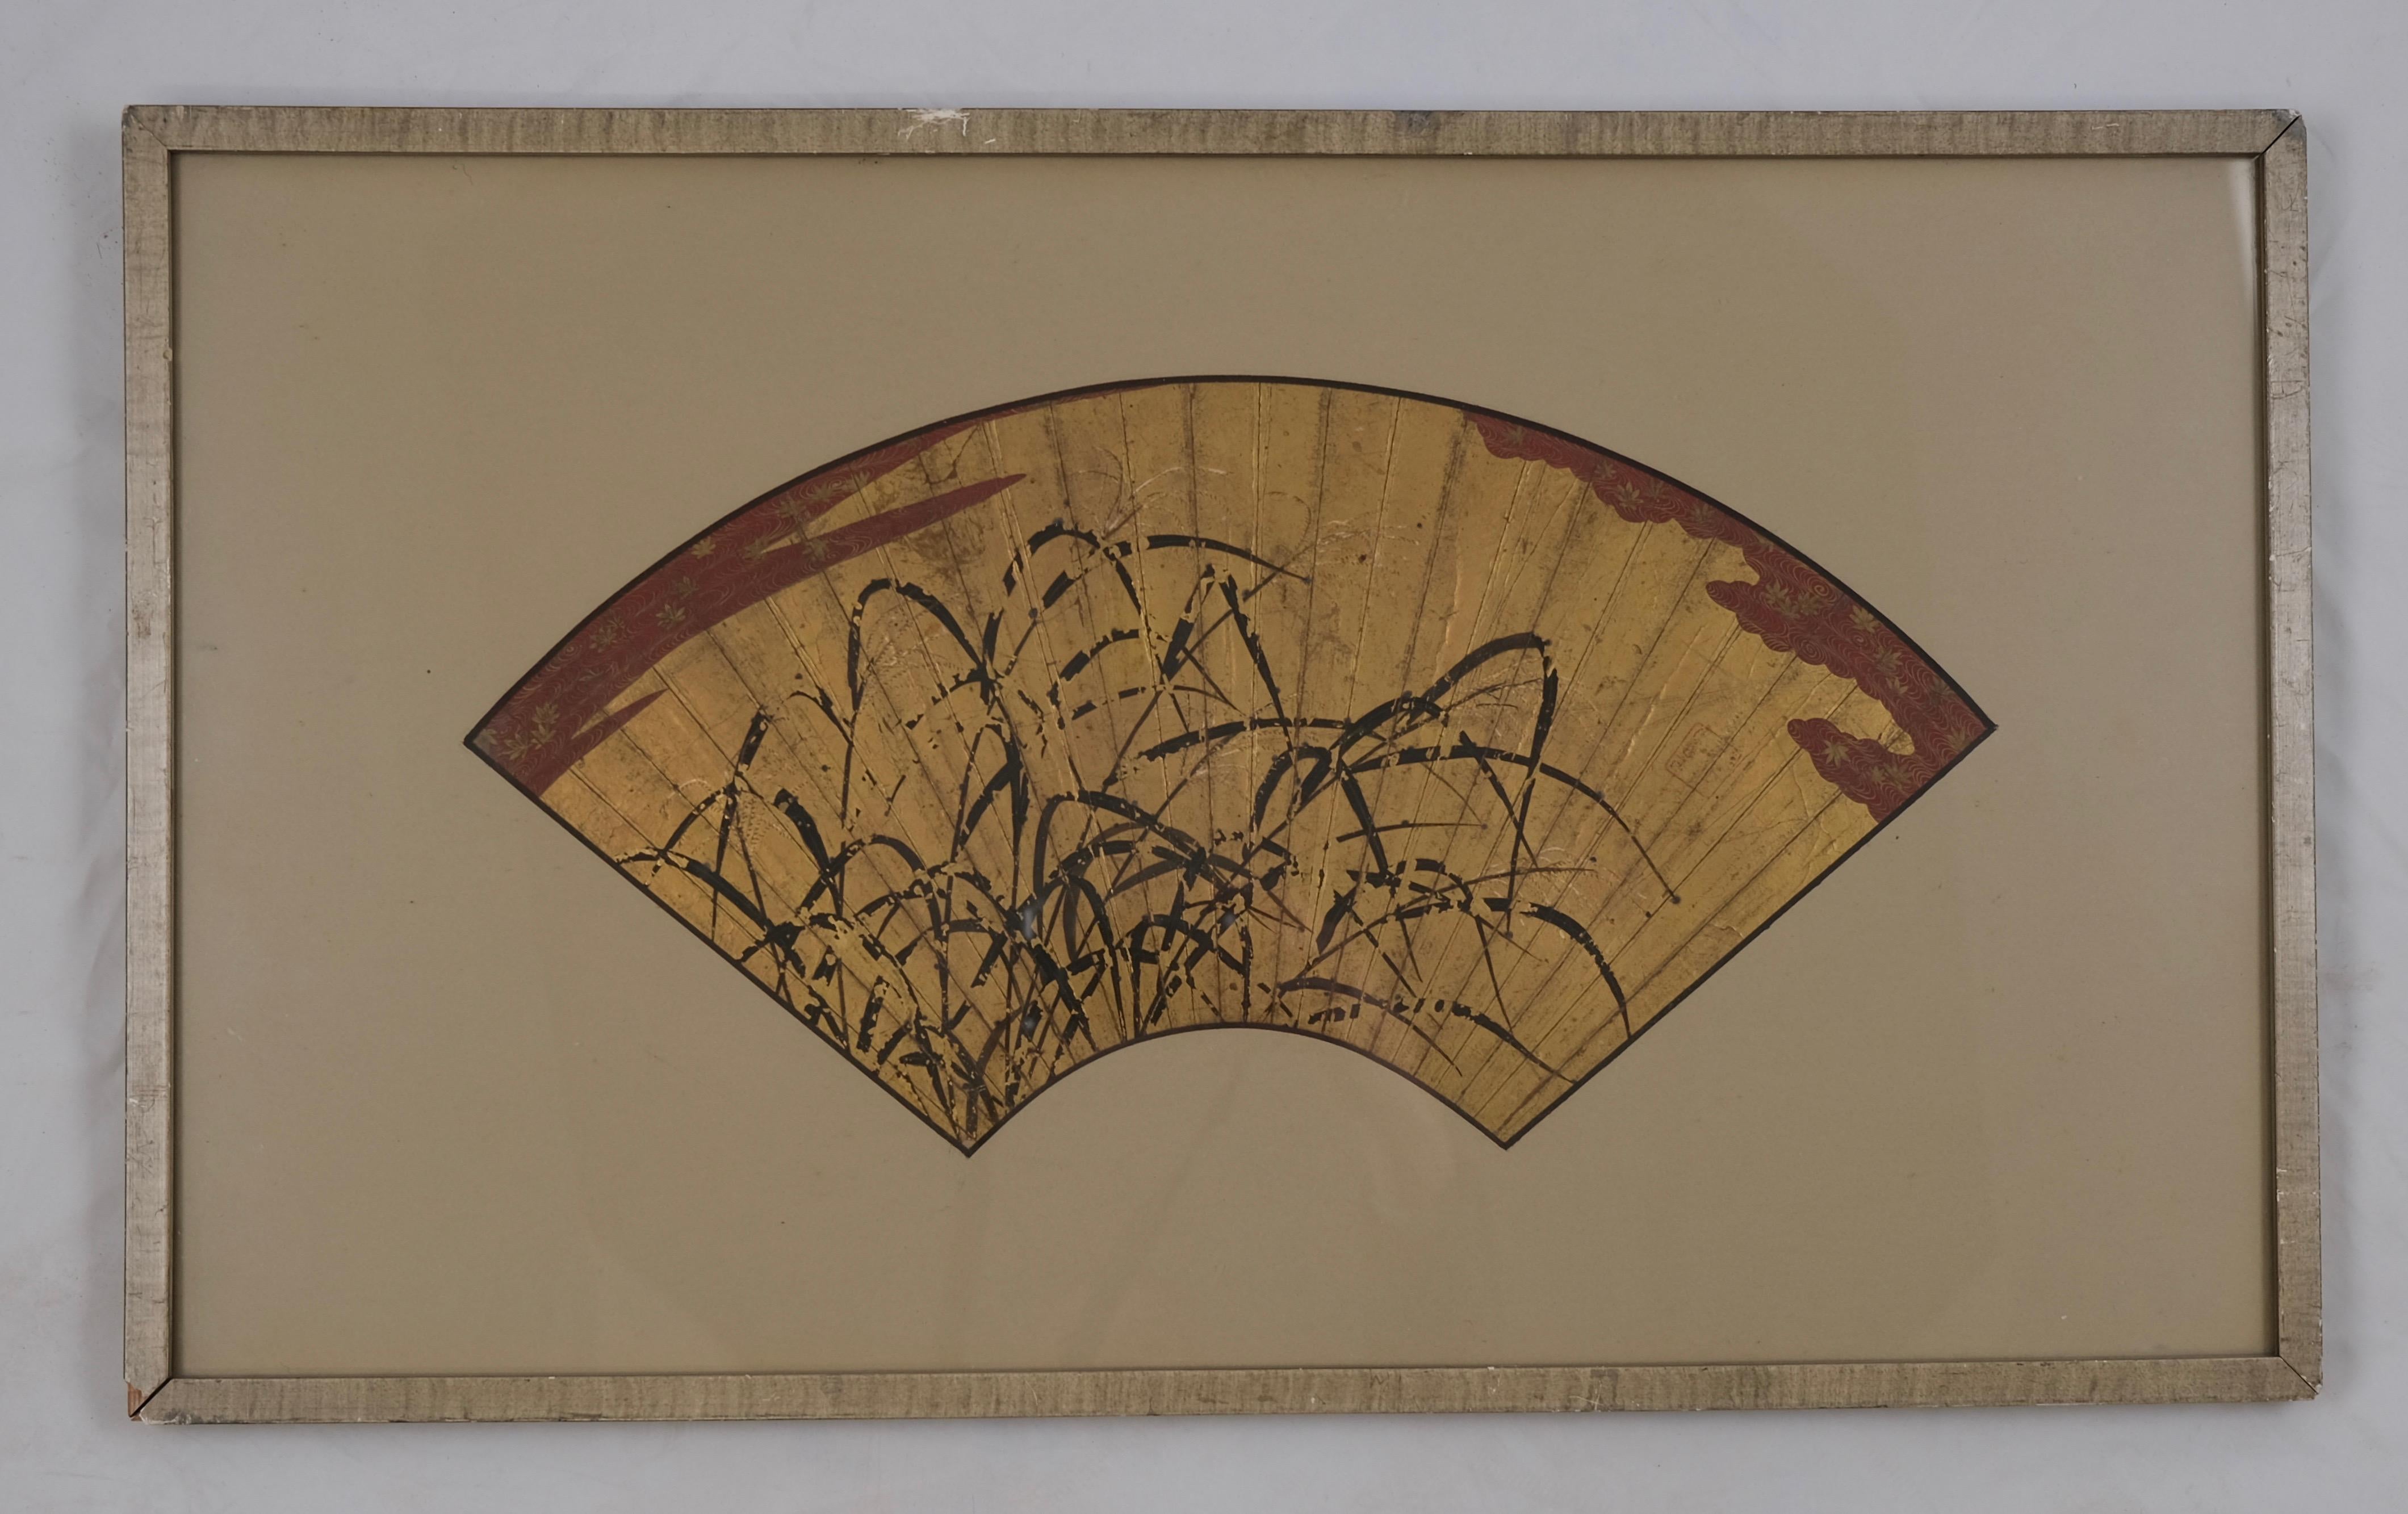 Japanese folding fan exquisitely painted in gold, red and black depicting bamboo central in the motive.

It has now mounted in a frame and is a great decoration. With frame the measurements are 68×37,5 cm just the fan measures 44×19 cm.

Signed